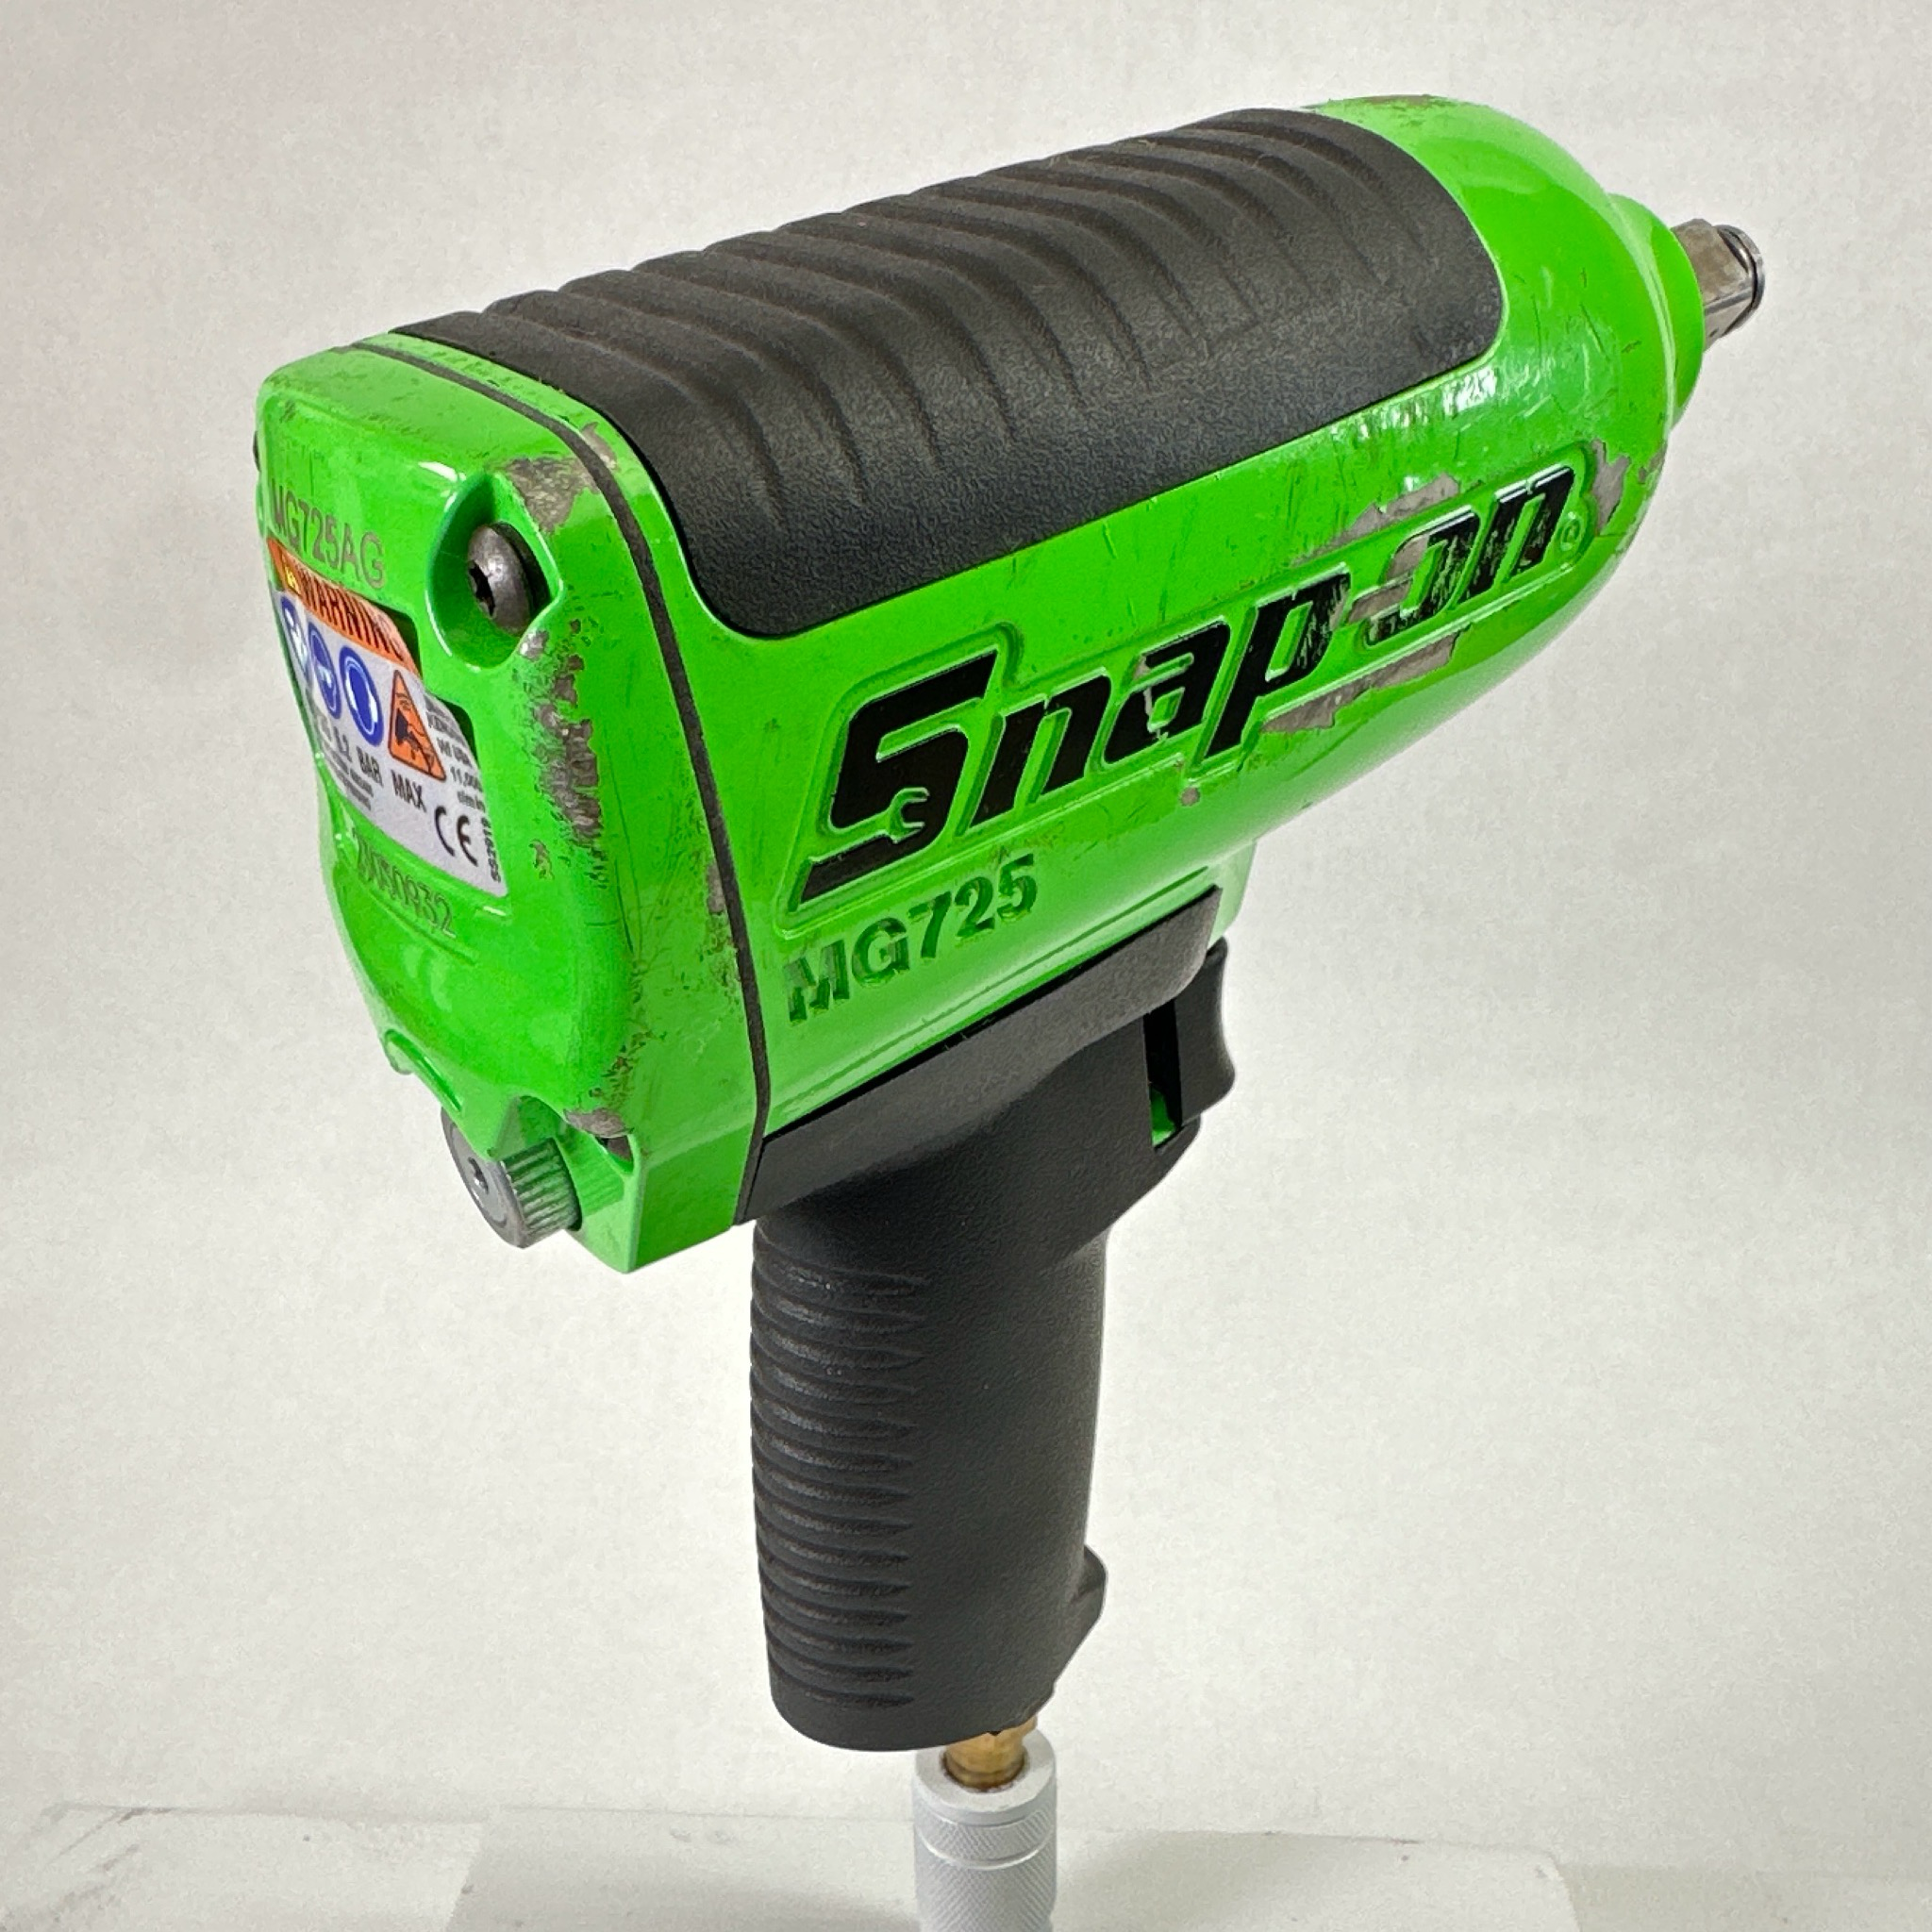 Snap On 1/2" Drive Heavy-Duty Air Impact Wrench, MG725 - Shop - Tool Swapper